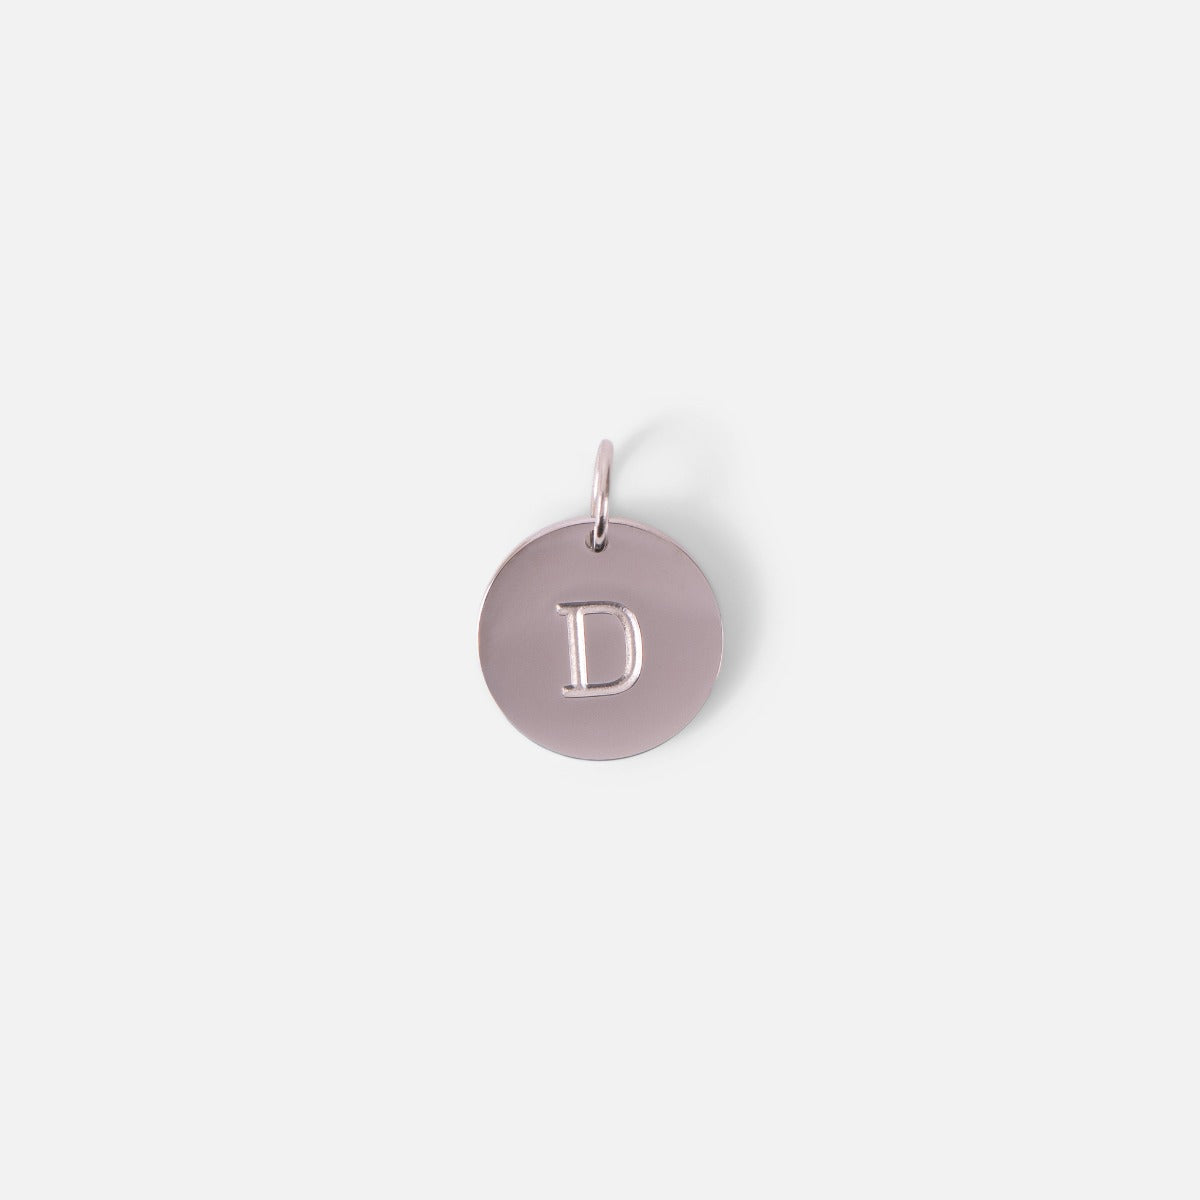 Small symbolic silvered charm engraved with the letter of the alphabet "d"